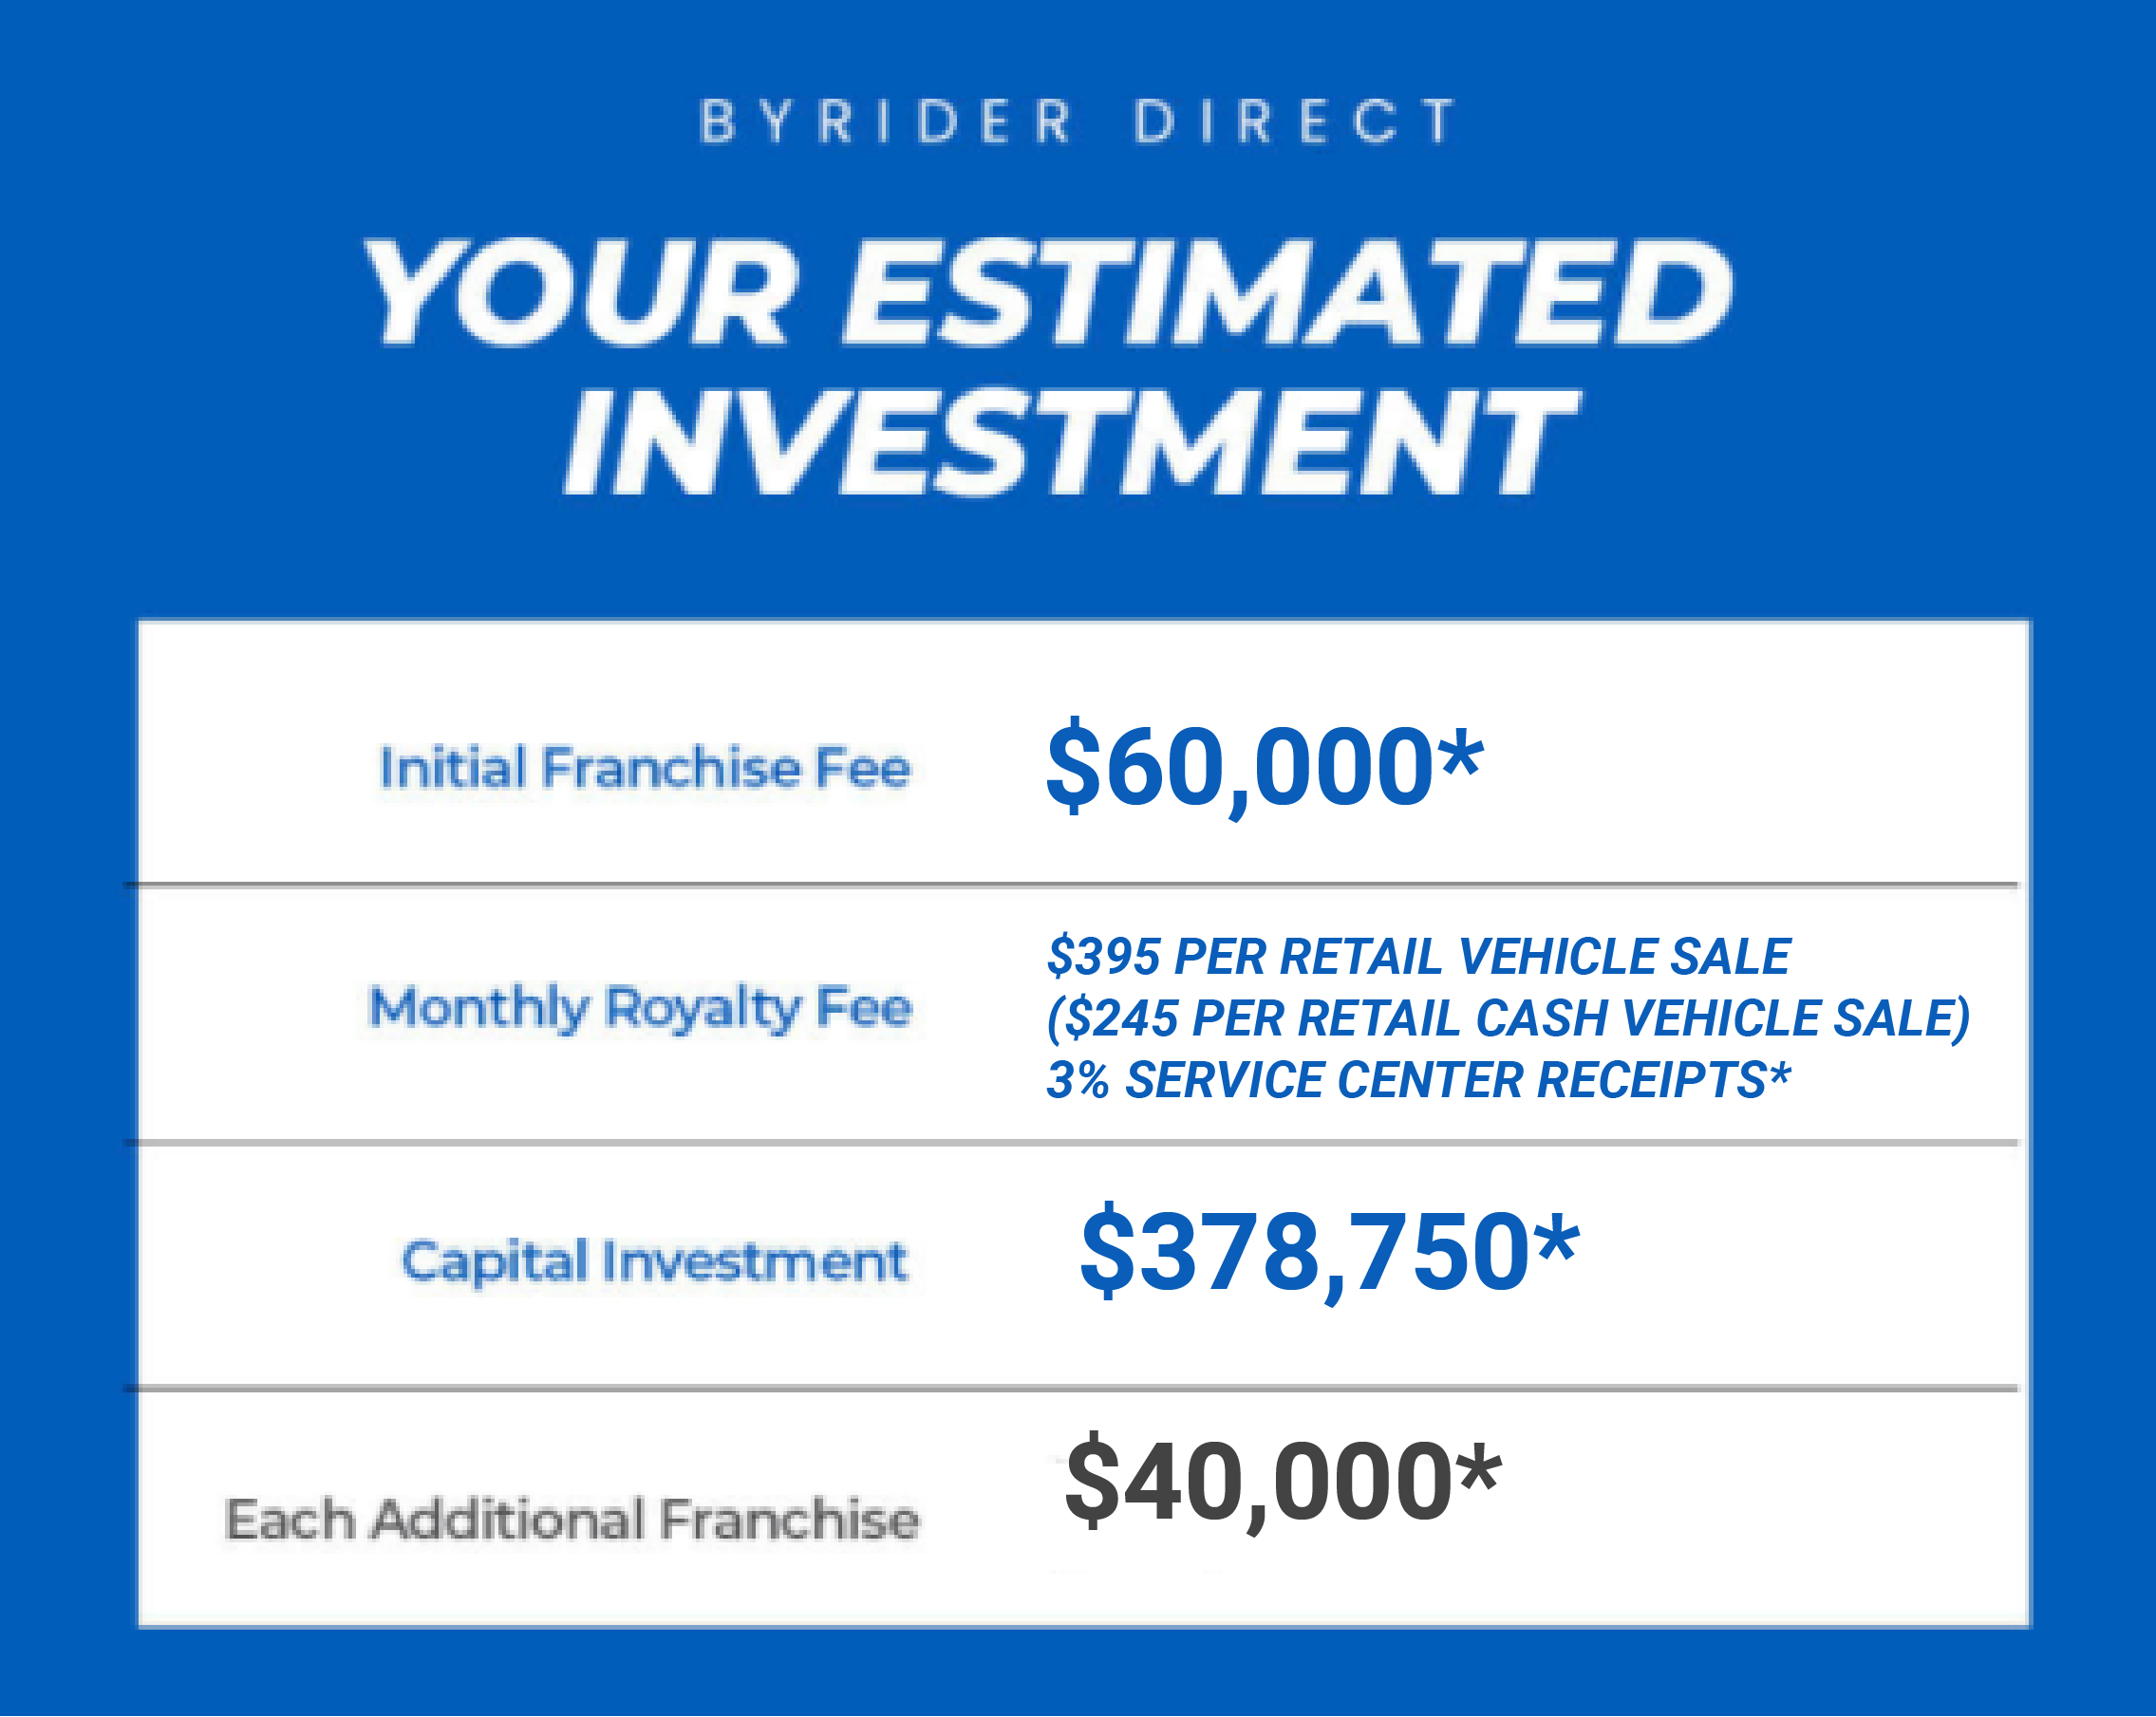 investment - byrider direct